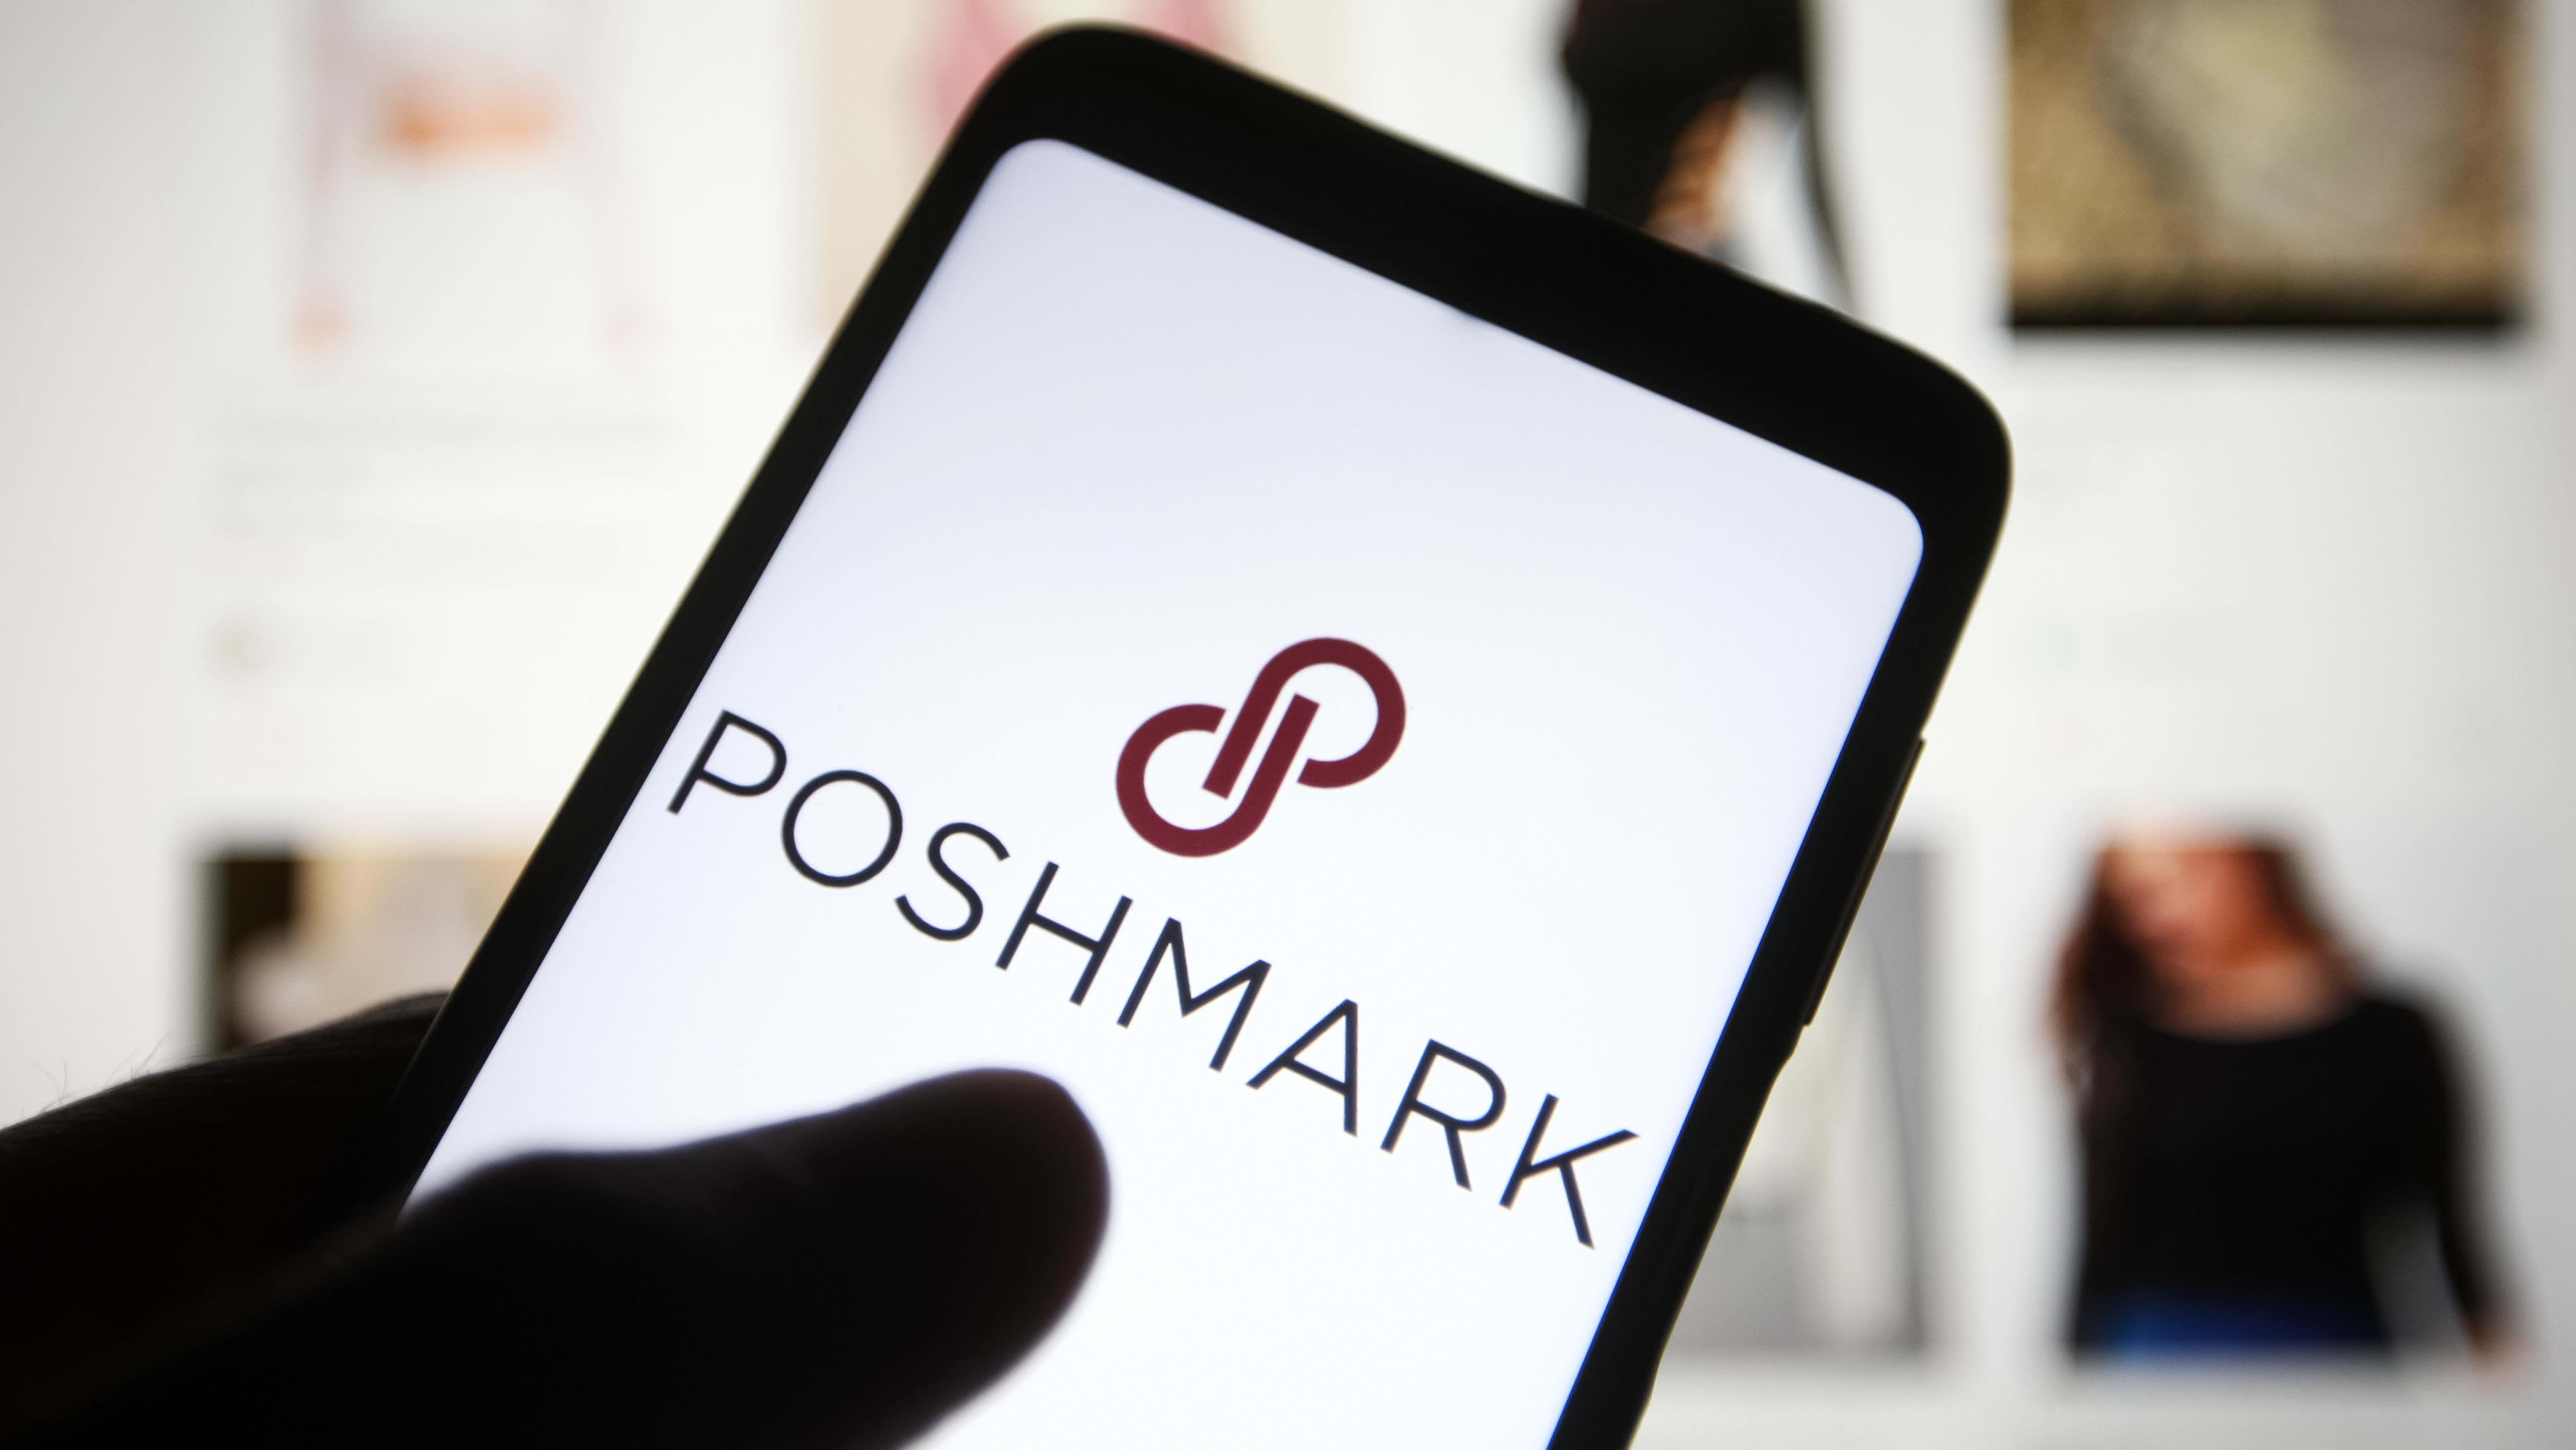 Poshmark CEO: Influencers 'pretty much driving our consumption